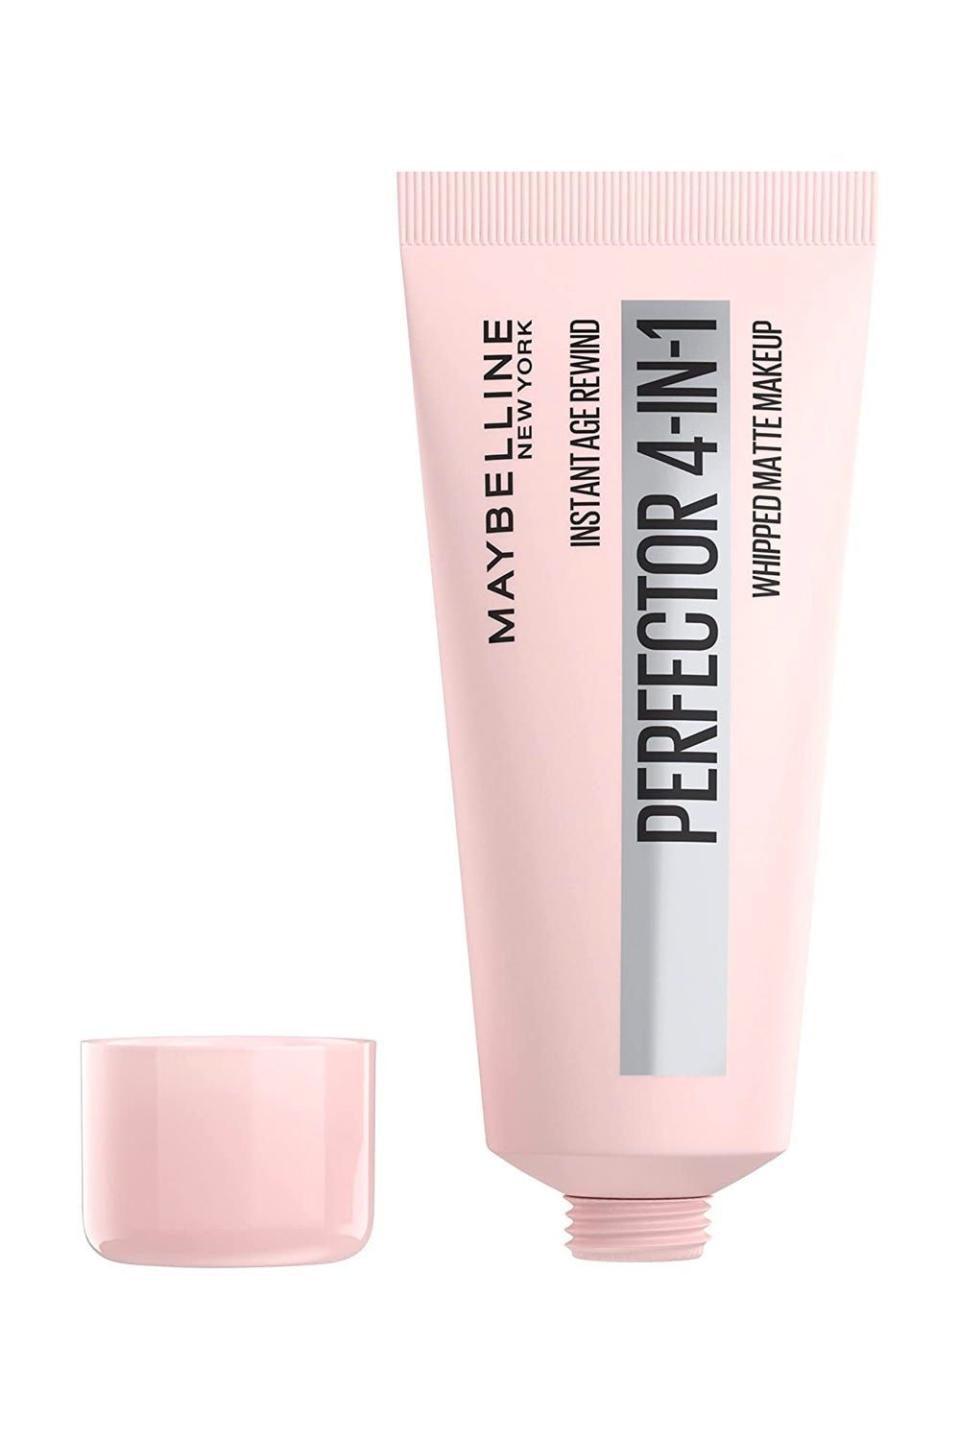 5) Maybelline New York Instant Age Rewind Instant Perfector 4-In-1 Matte Makeup, 05 Deep, 1 Ounce